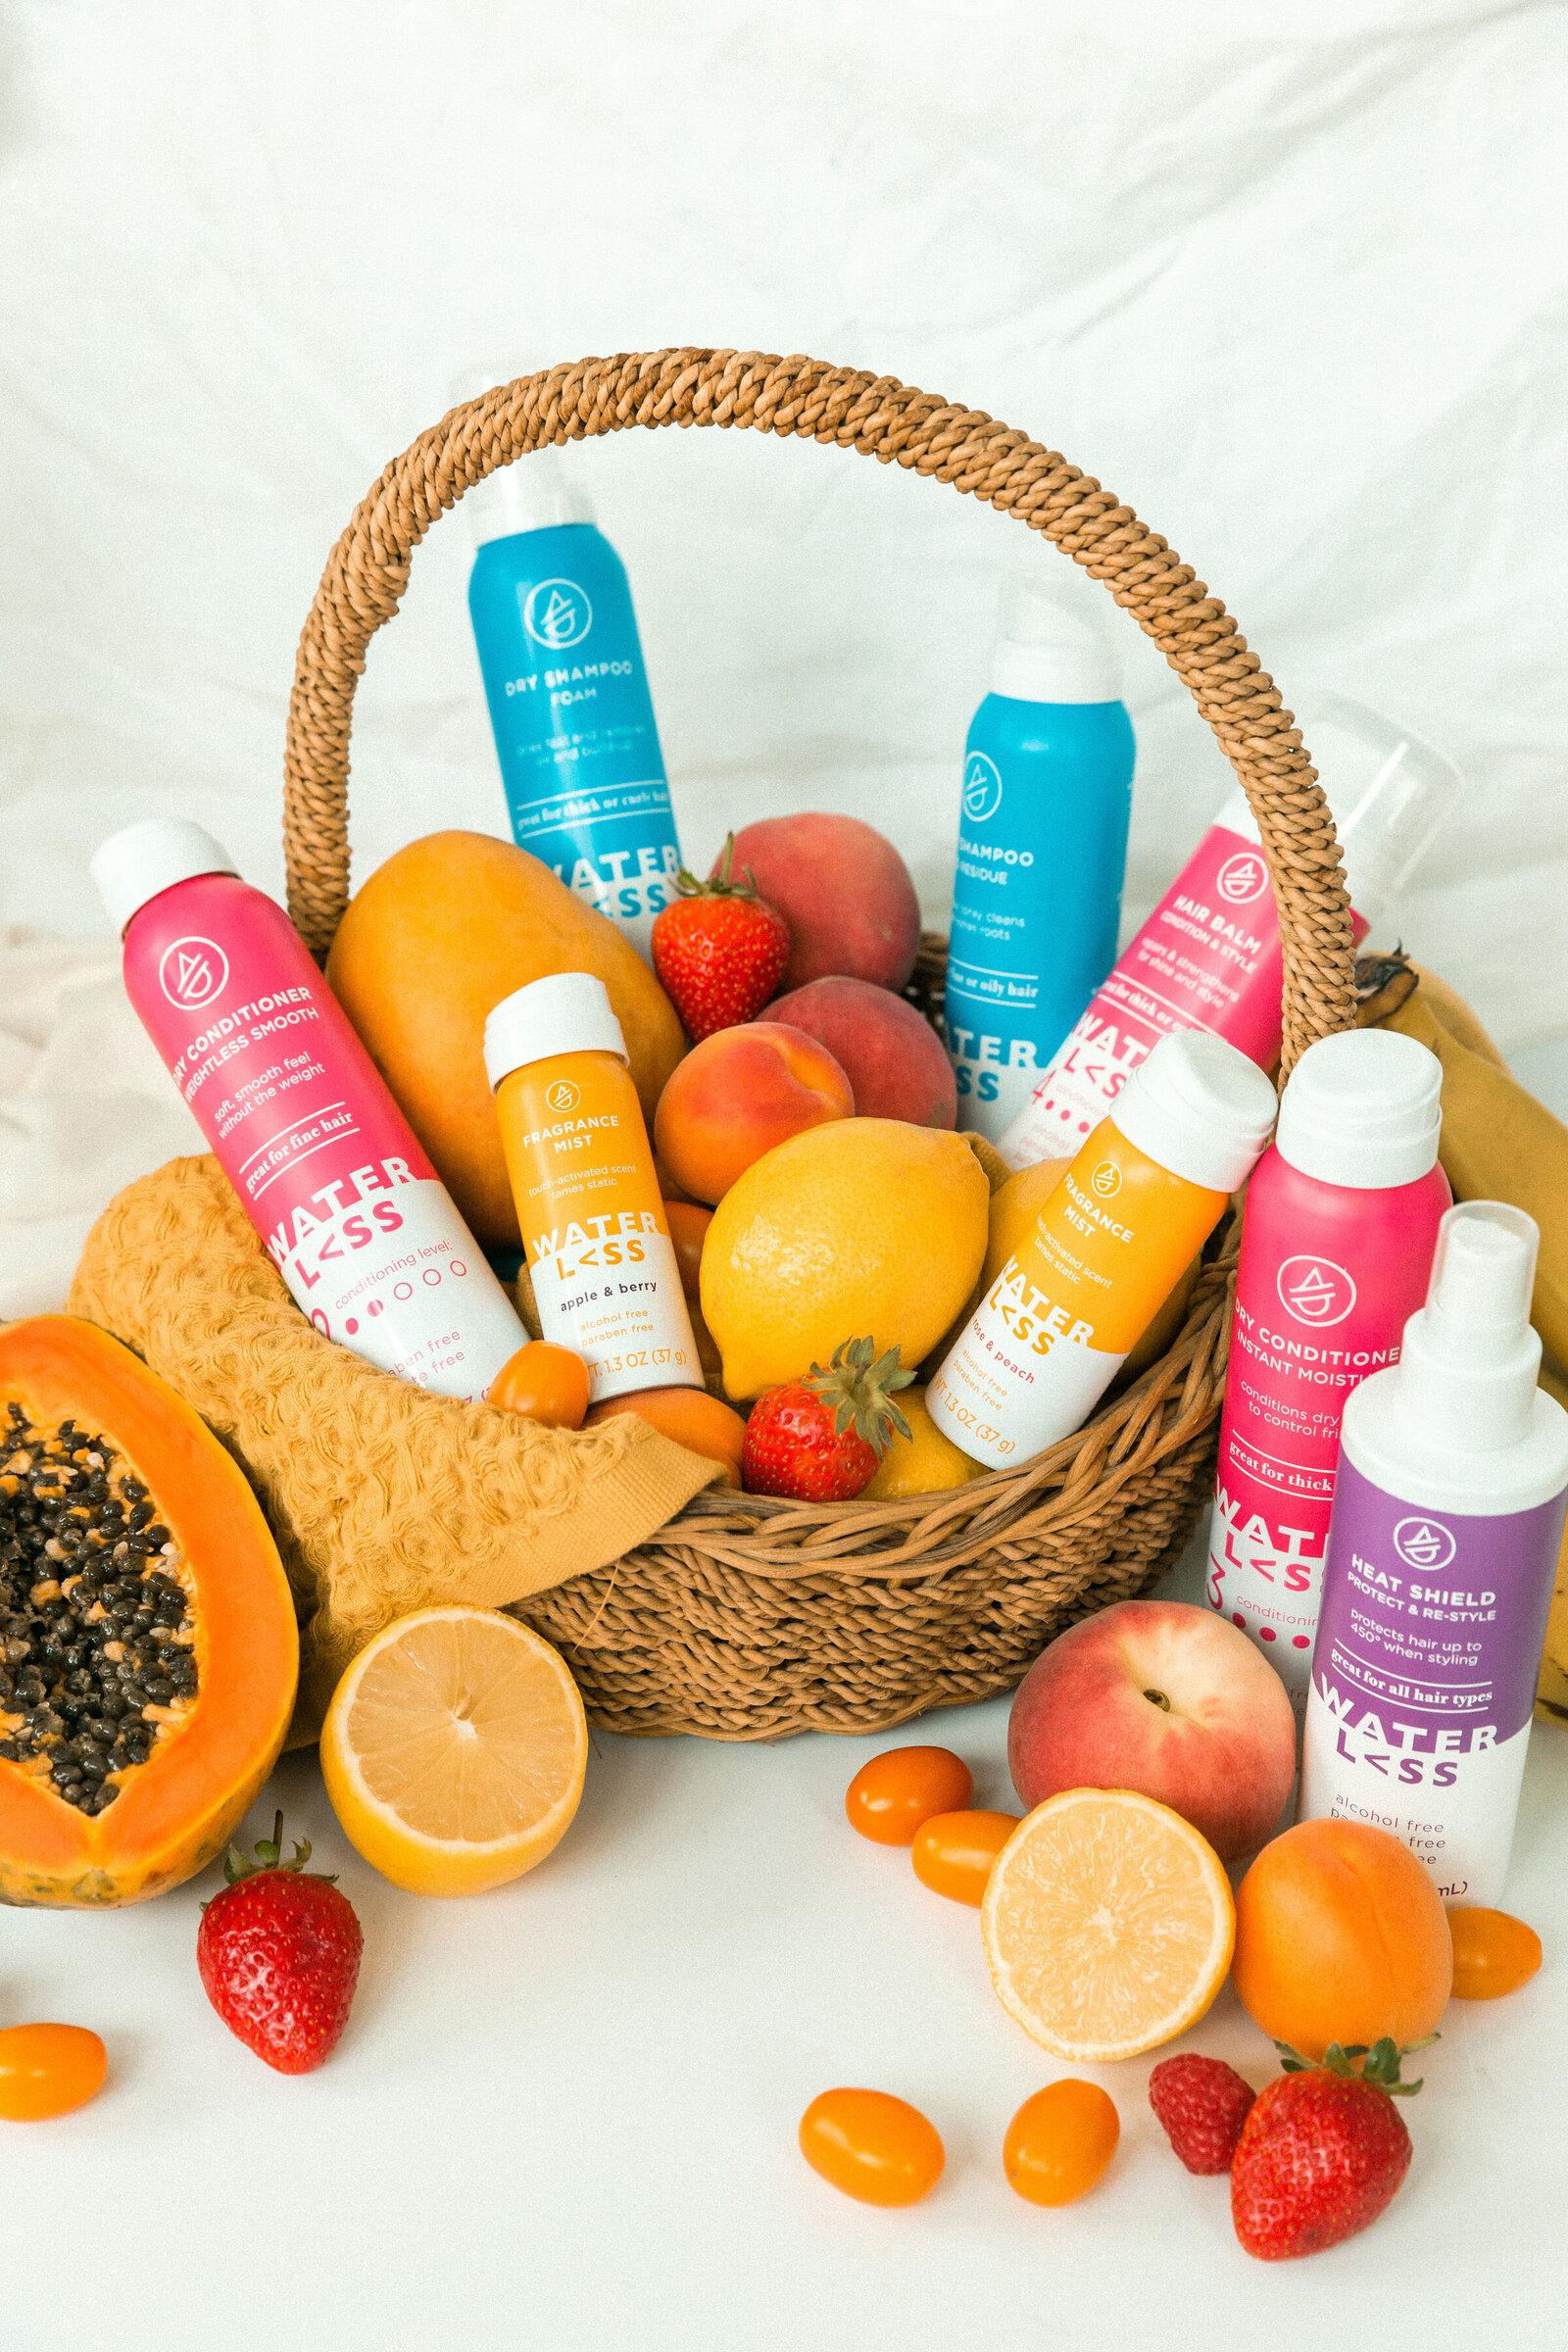 Playful and colorful product photography for haircare skincare brand by Chelsea Loren.